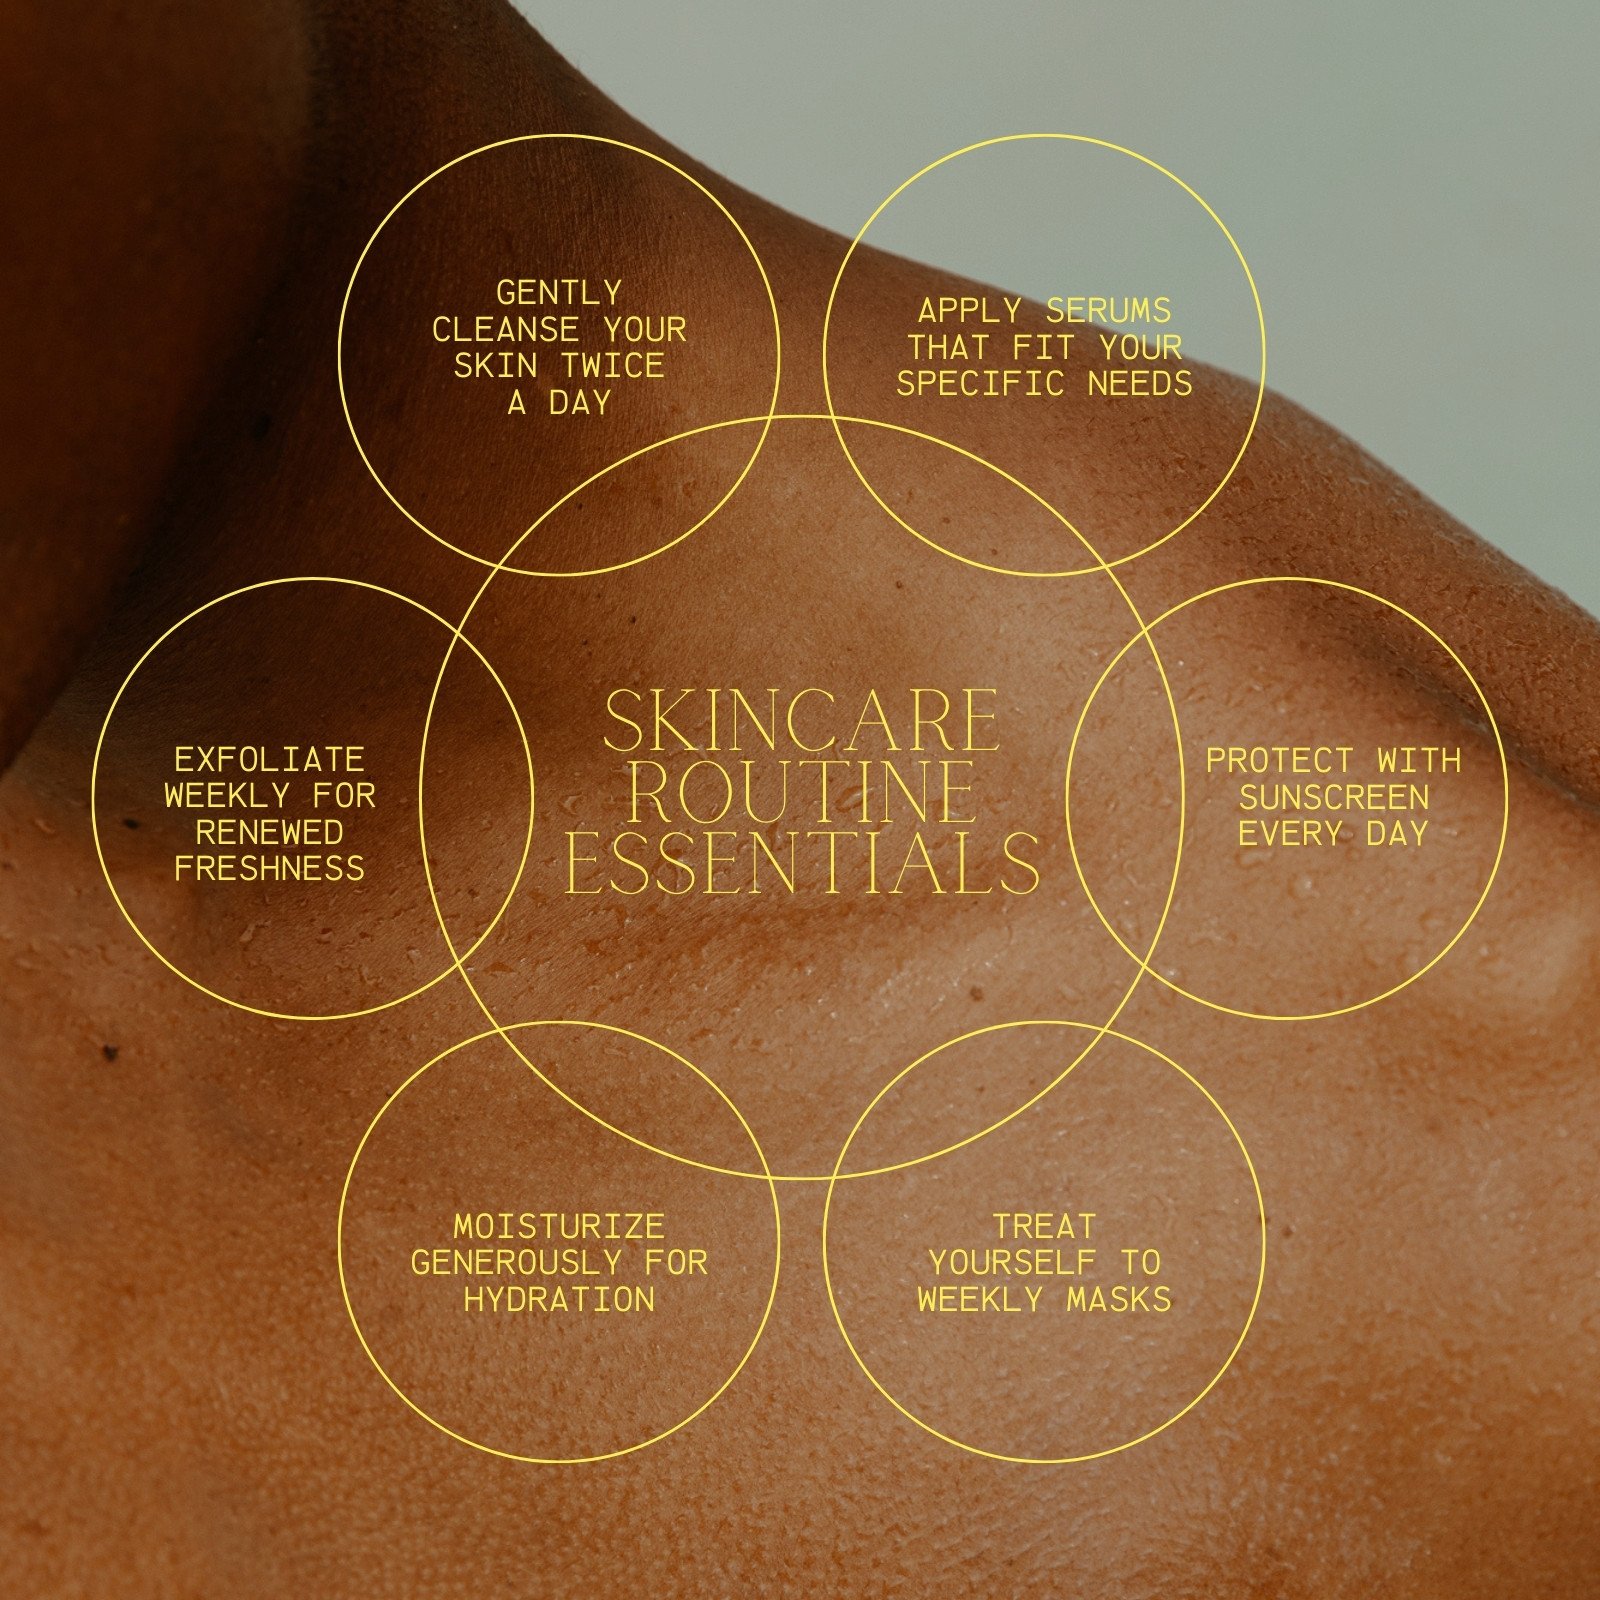 Yellow Simple Aesthetic Skincare Tips Infographic Instagram Post